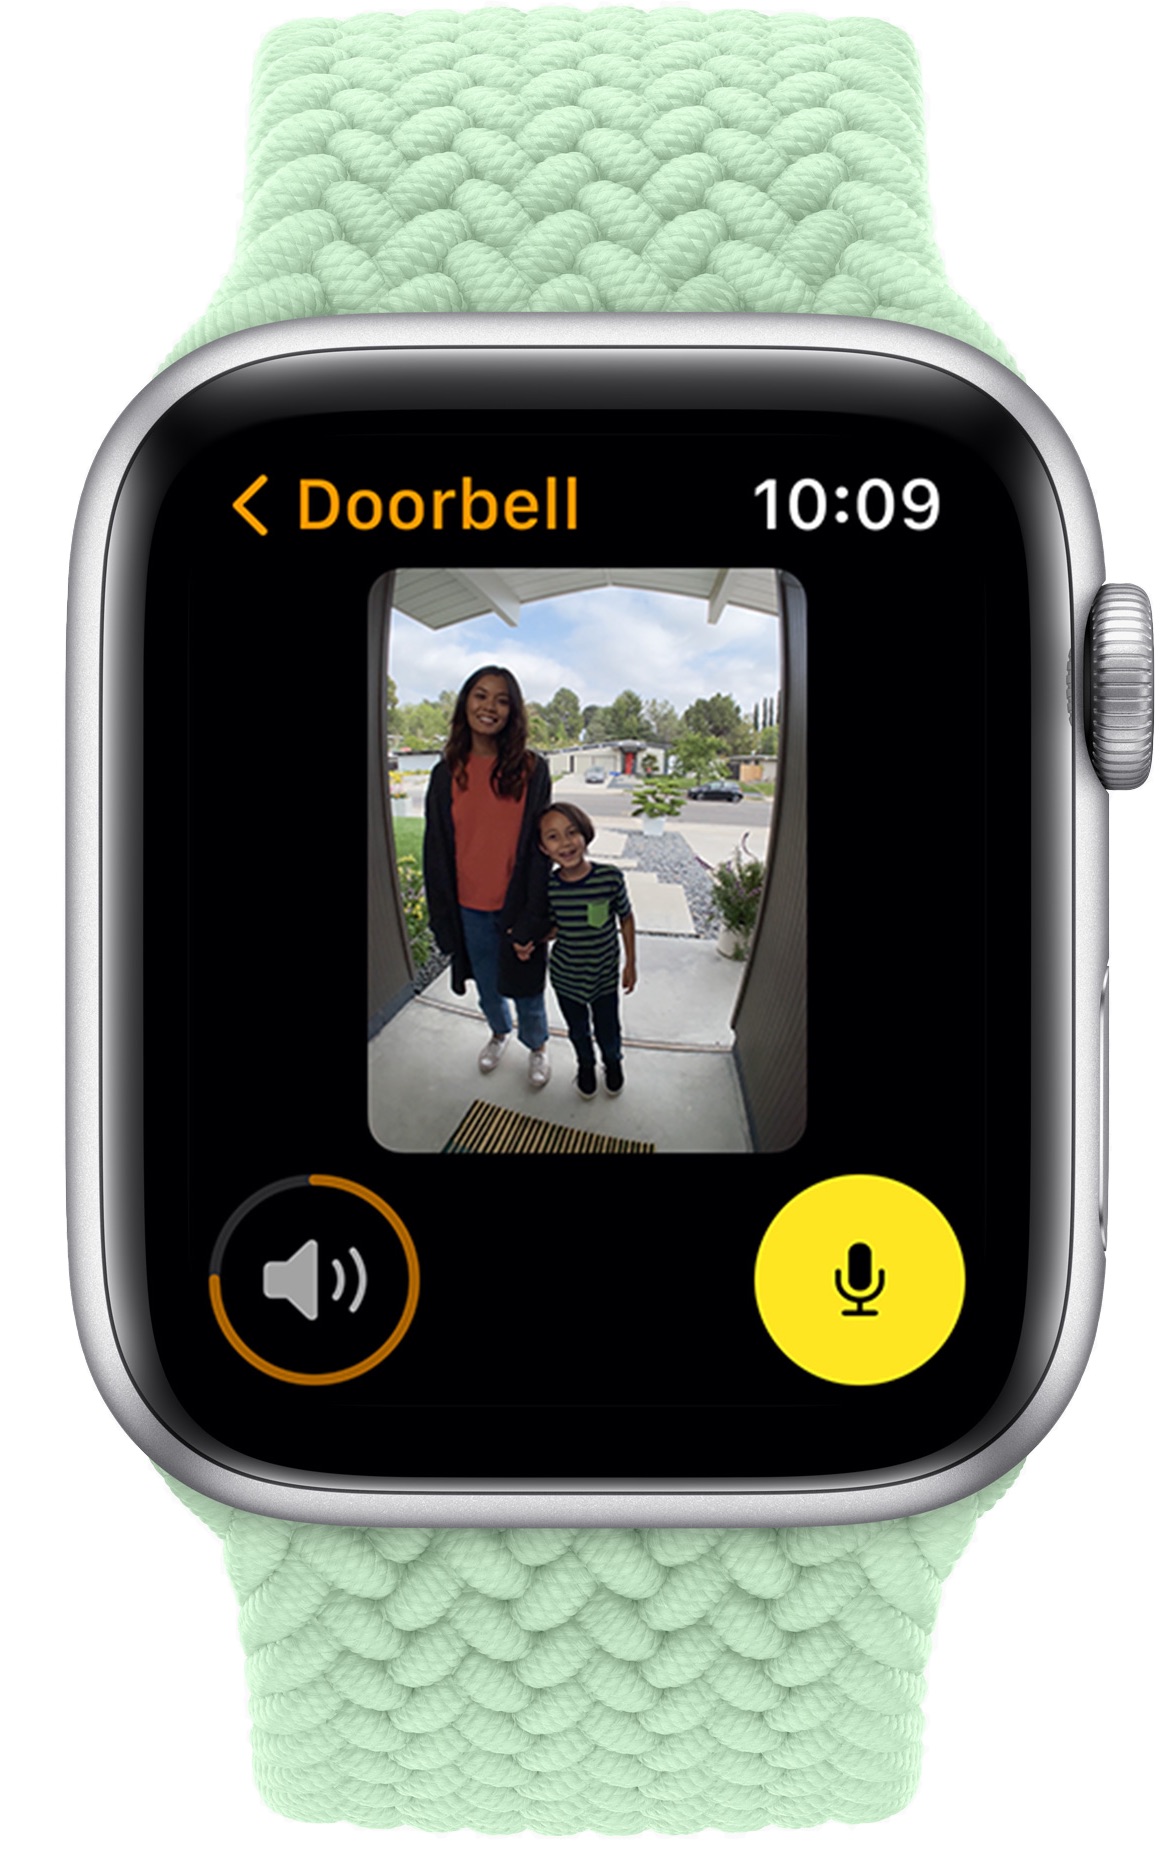 The Home app on watchOS 8 shows an Apple Watch user viewing live video from a HomeKit security doorbell camera